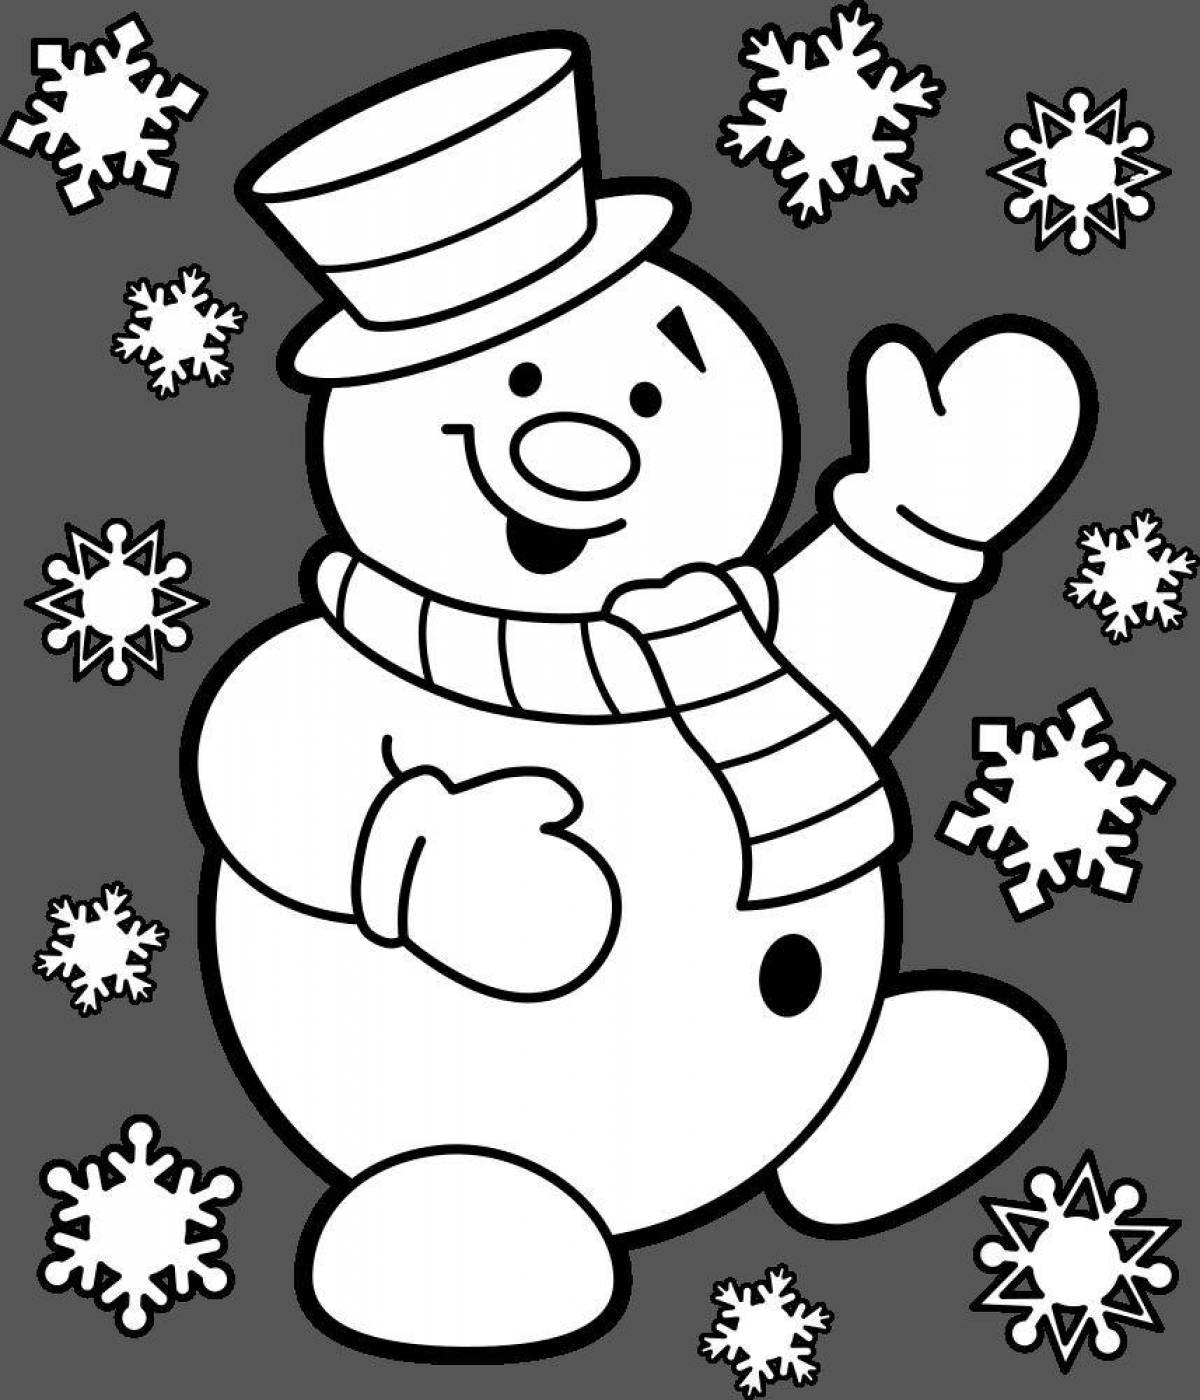 Fabulous coloring book snowman for children 5 years old